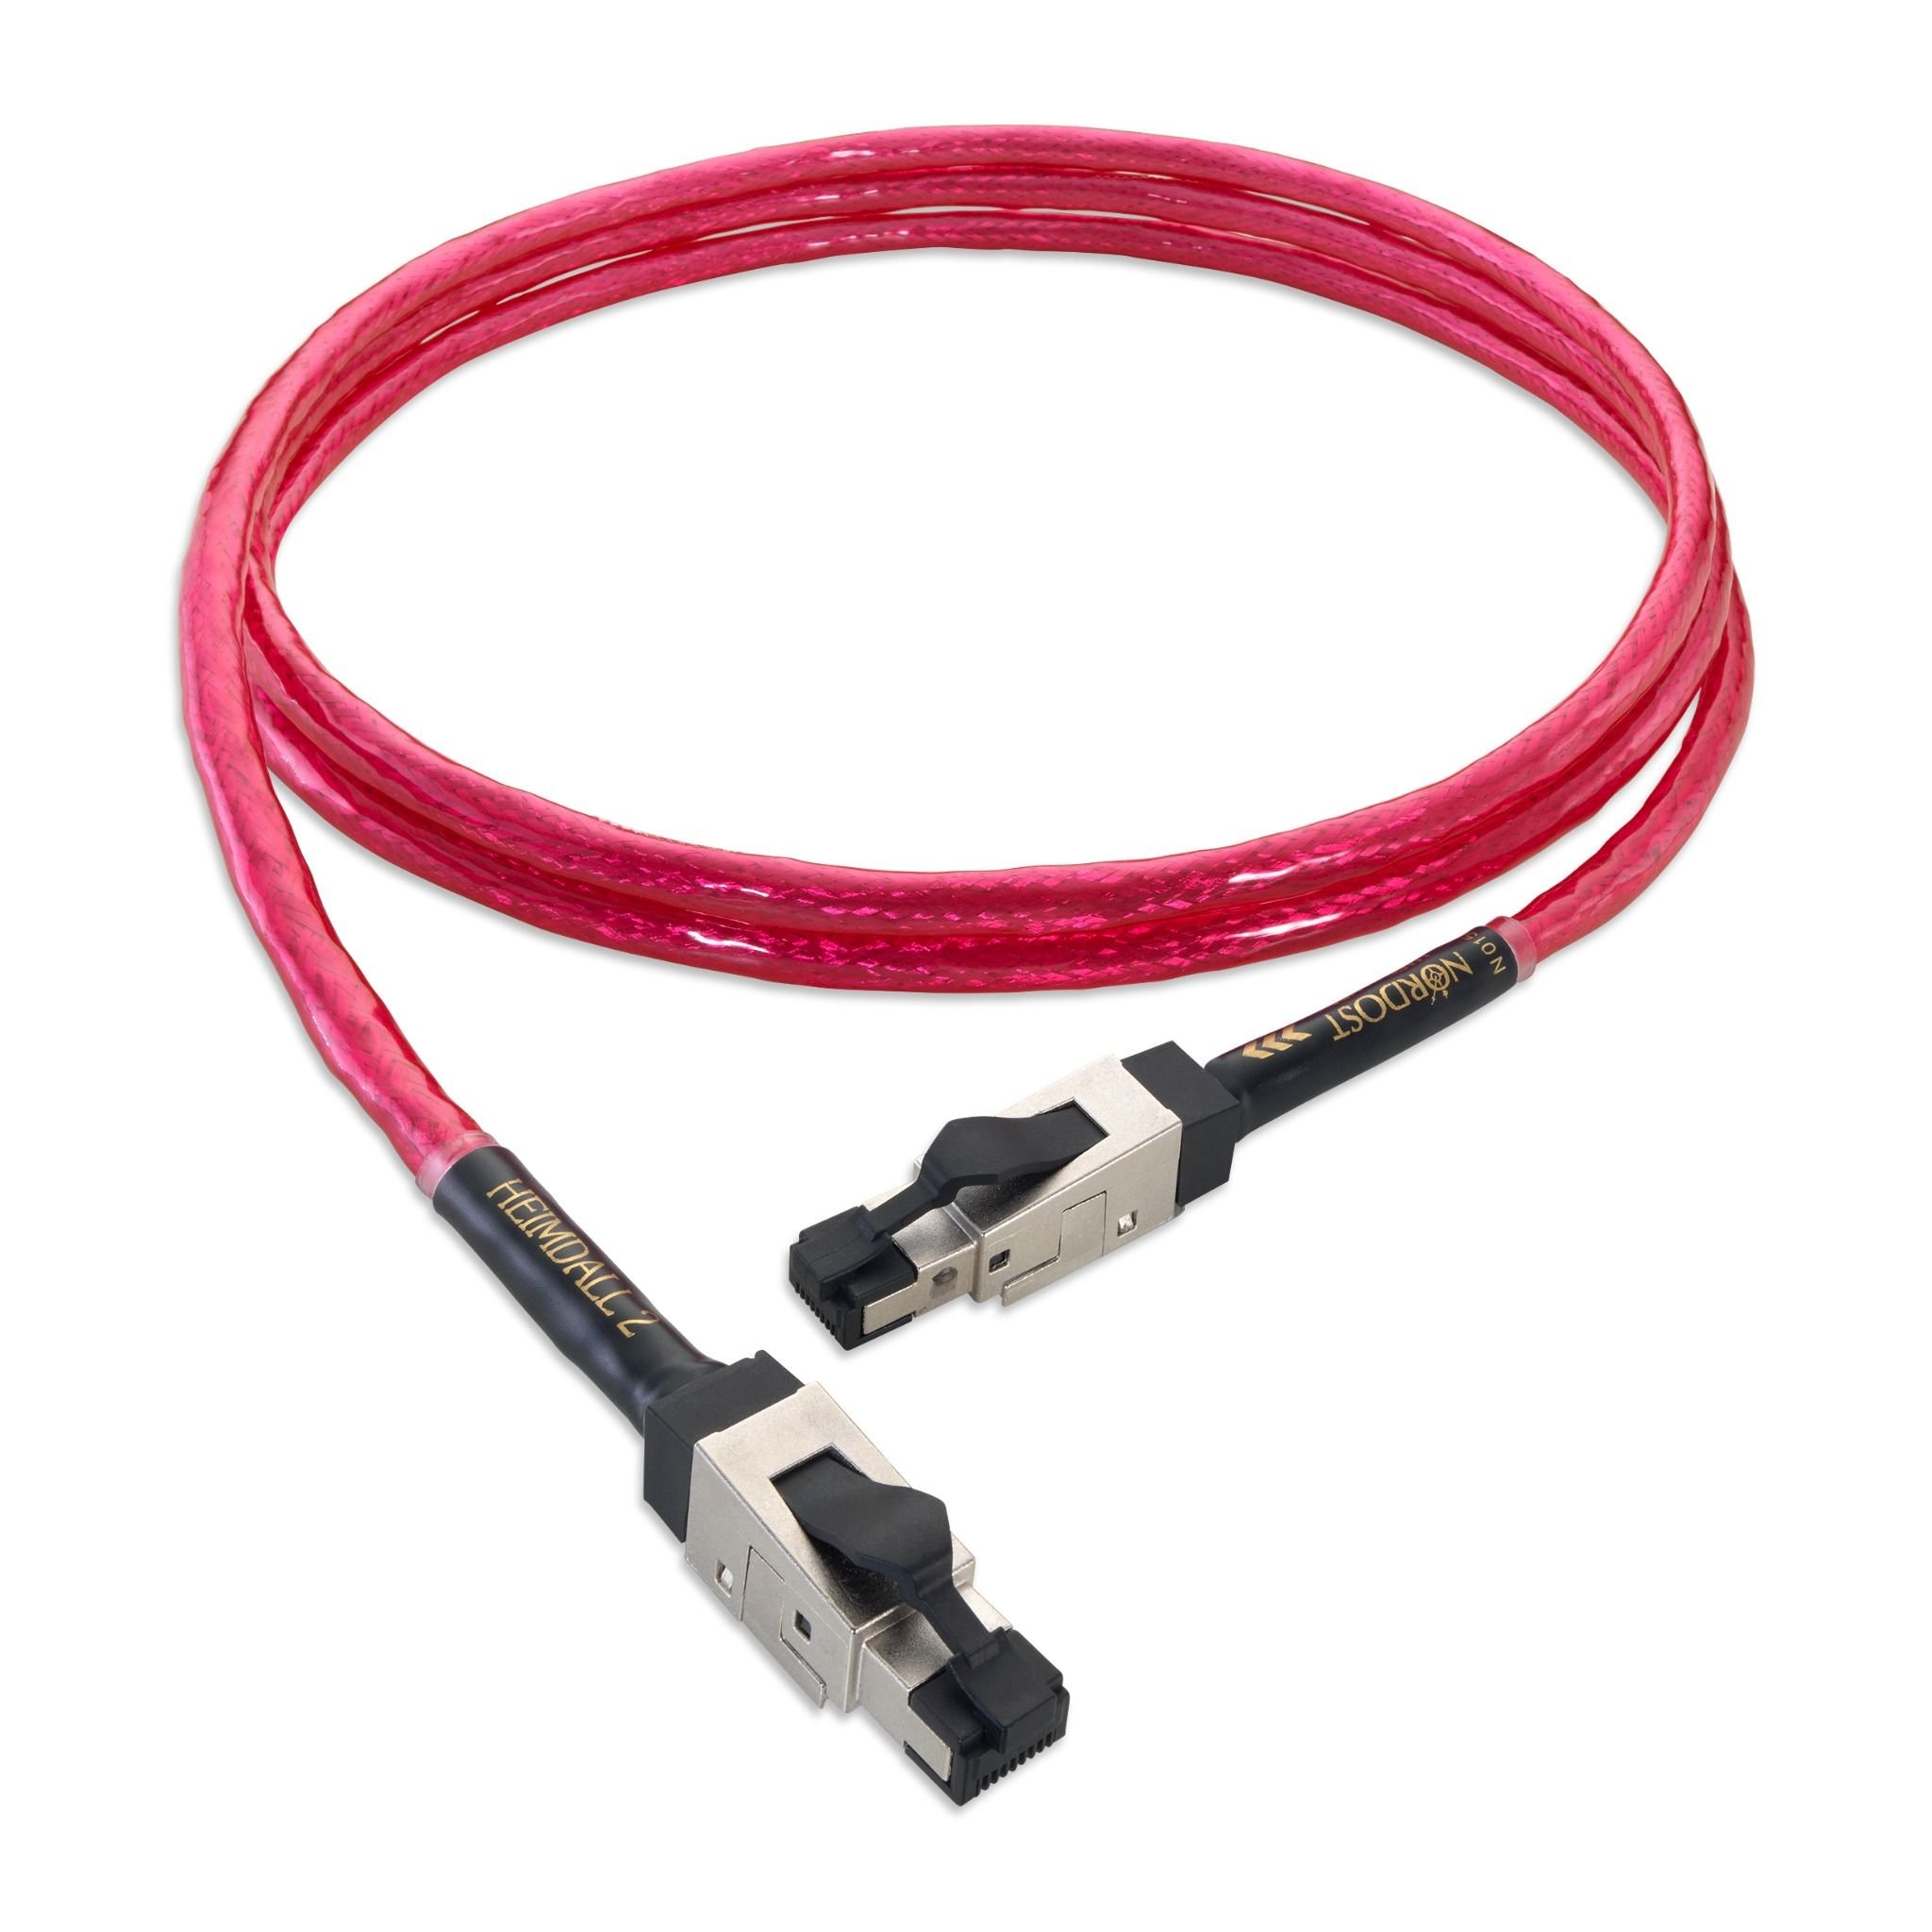  DÂY ETHERNET NORDOST NORSE 2 HEIMDALL 2 